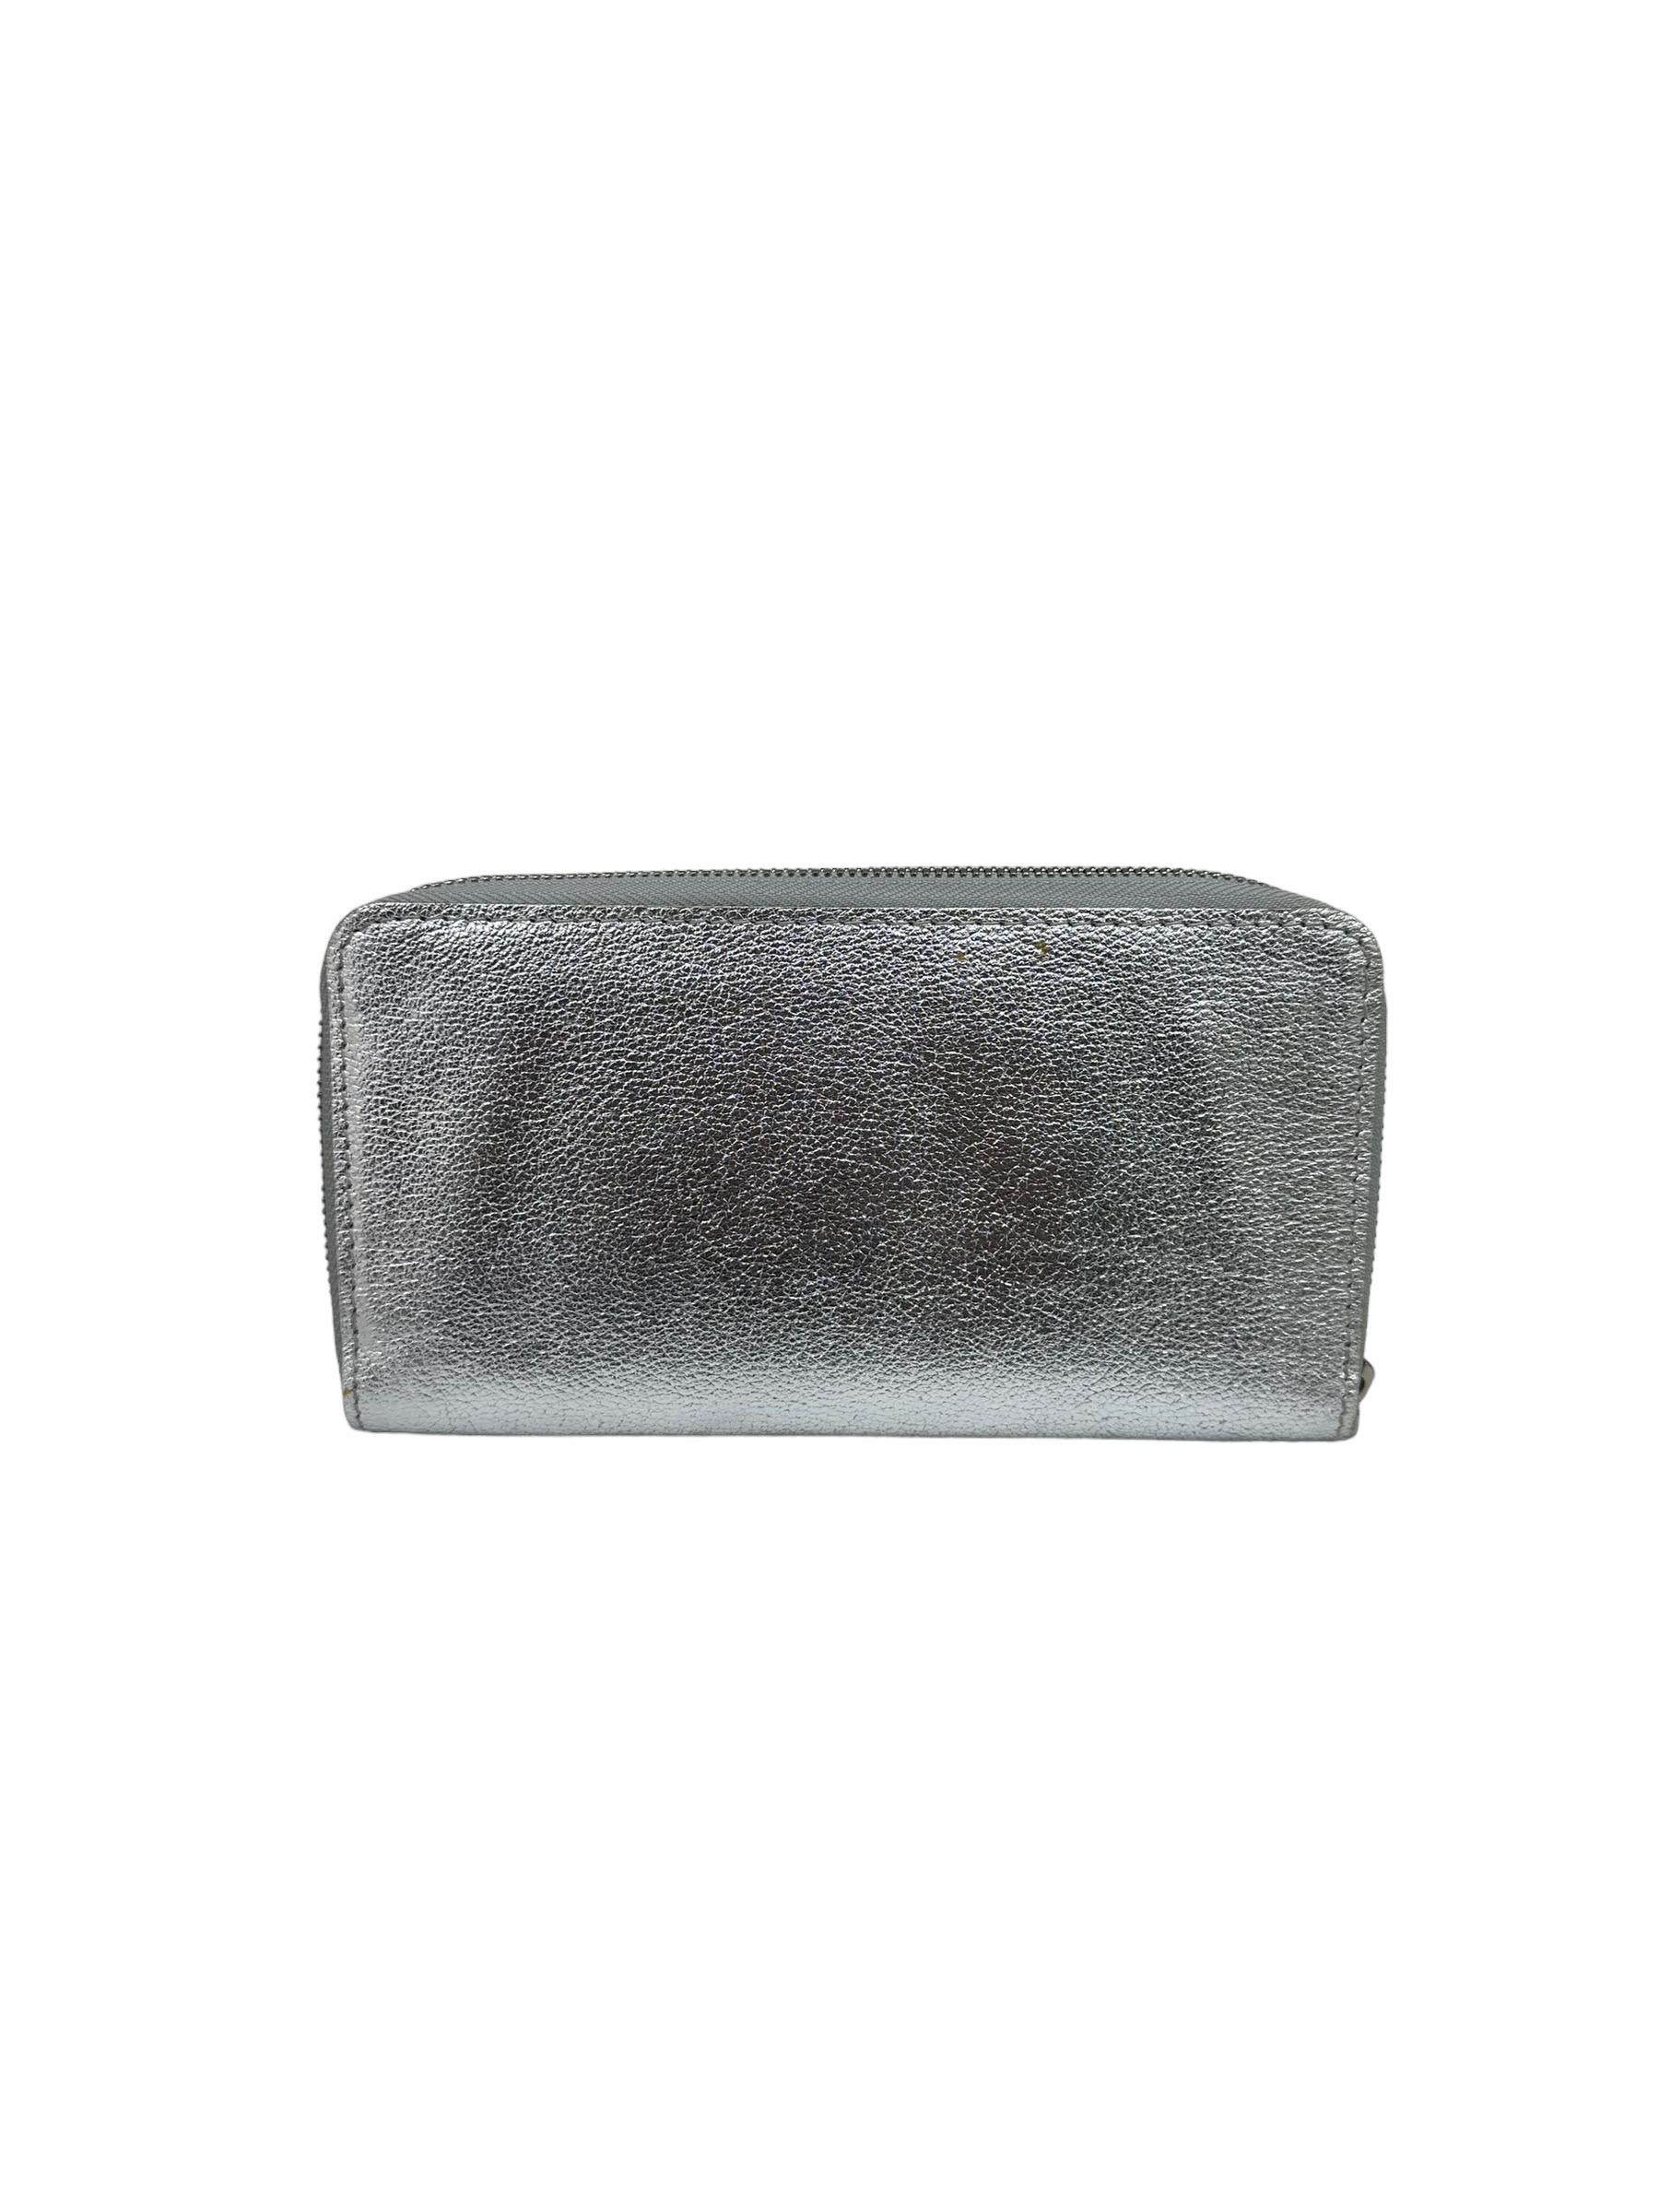 Louis Vuitton Zippy Suhali Wallet Silver Leather  In Good Condition For Sale In Torre Del Greco, IT